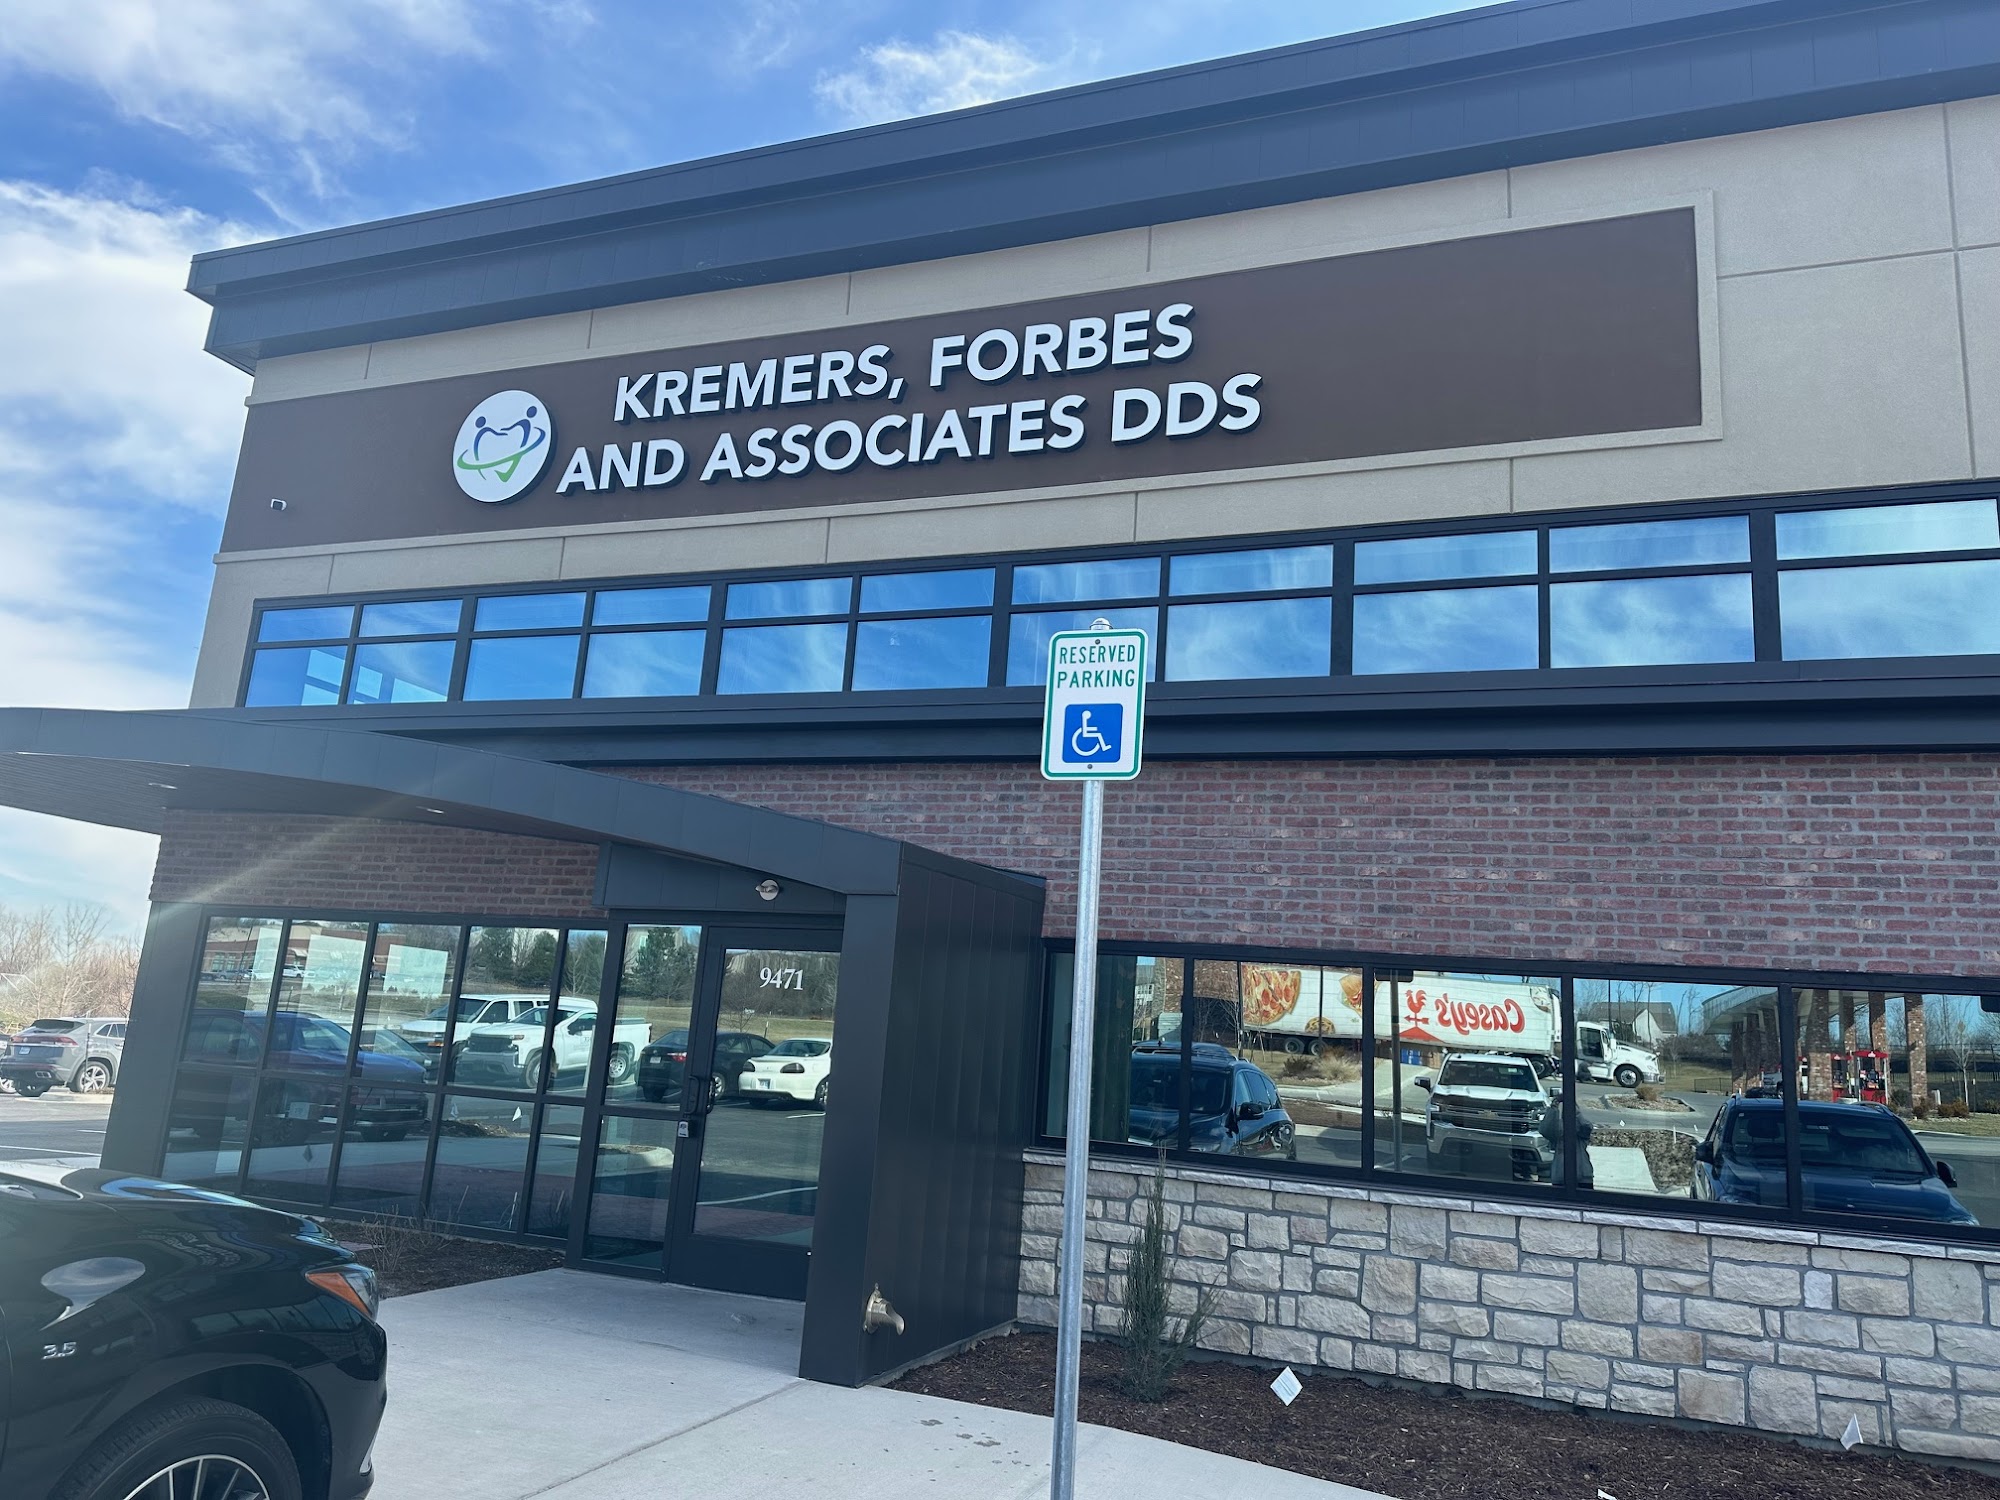 Kremers, Forbes and Associates DDS